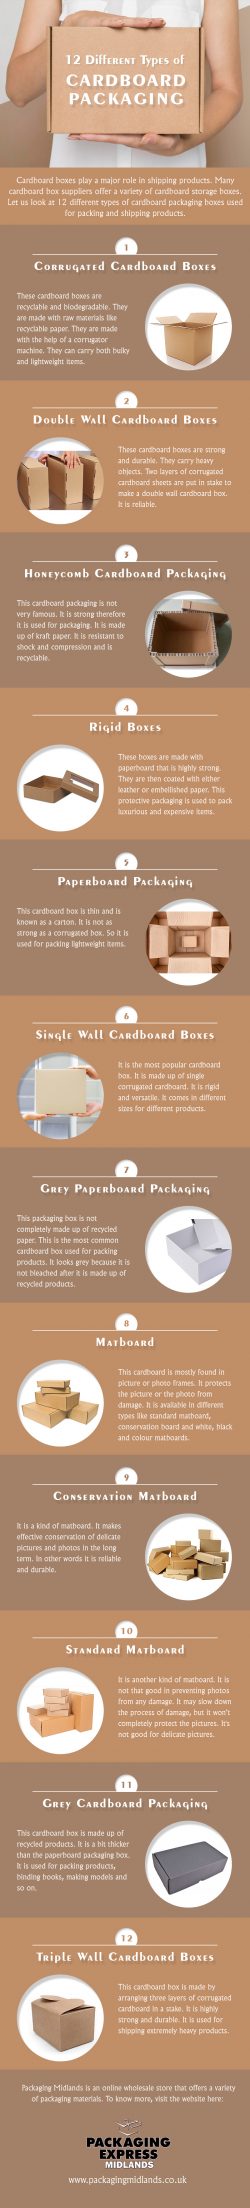 Infographic: Different Types of Cardboard Boxes